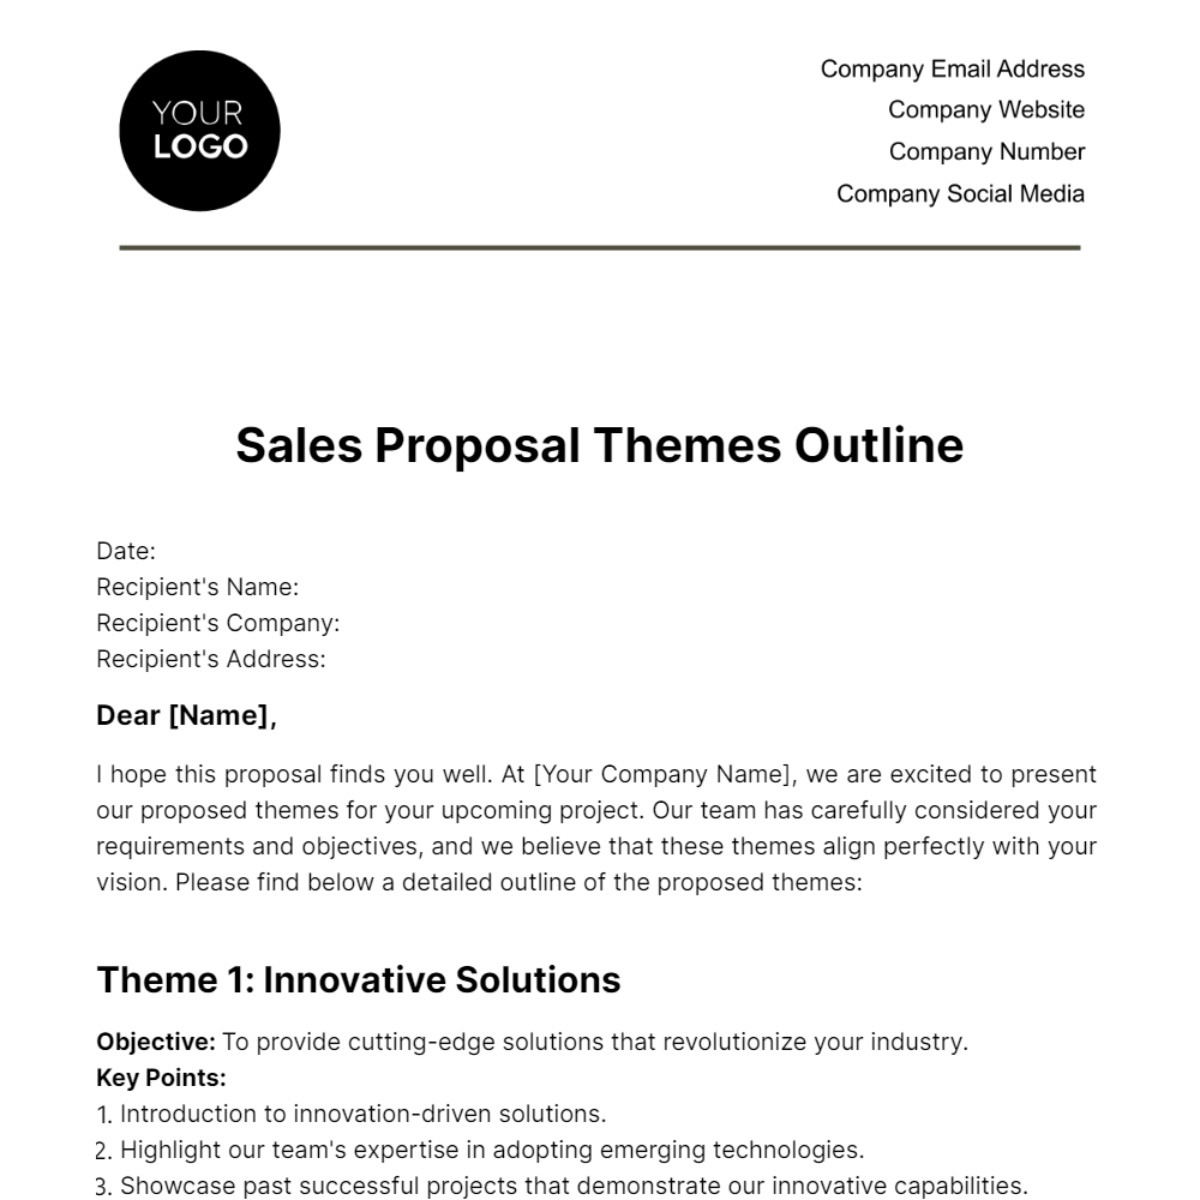 Free Sales Proposal Themes Outline Template